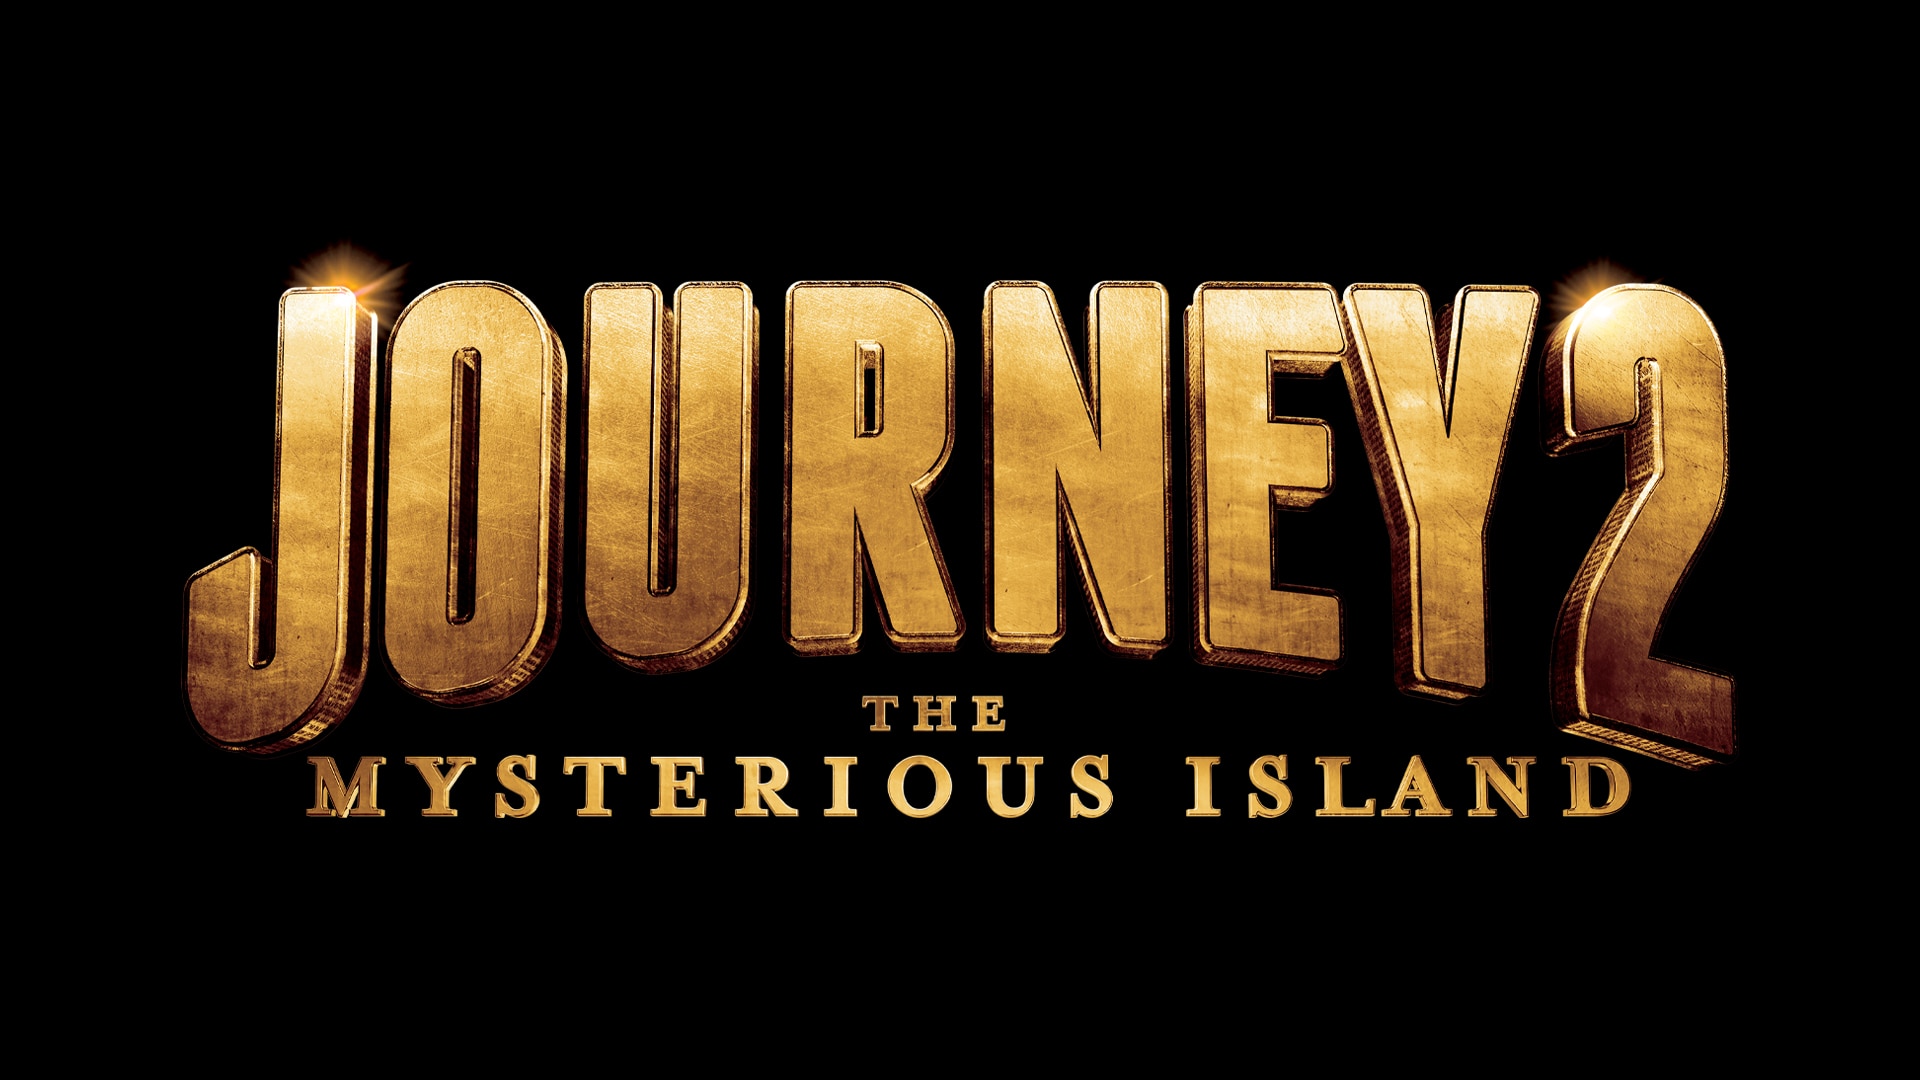 journey to the mysterious island 3 release date